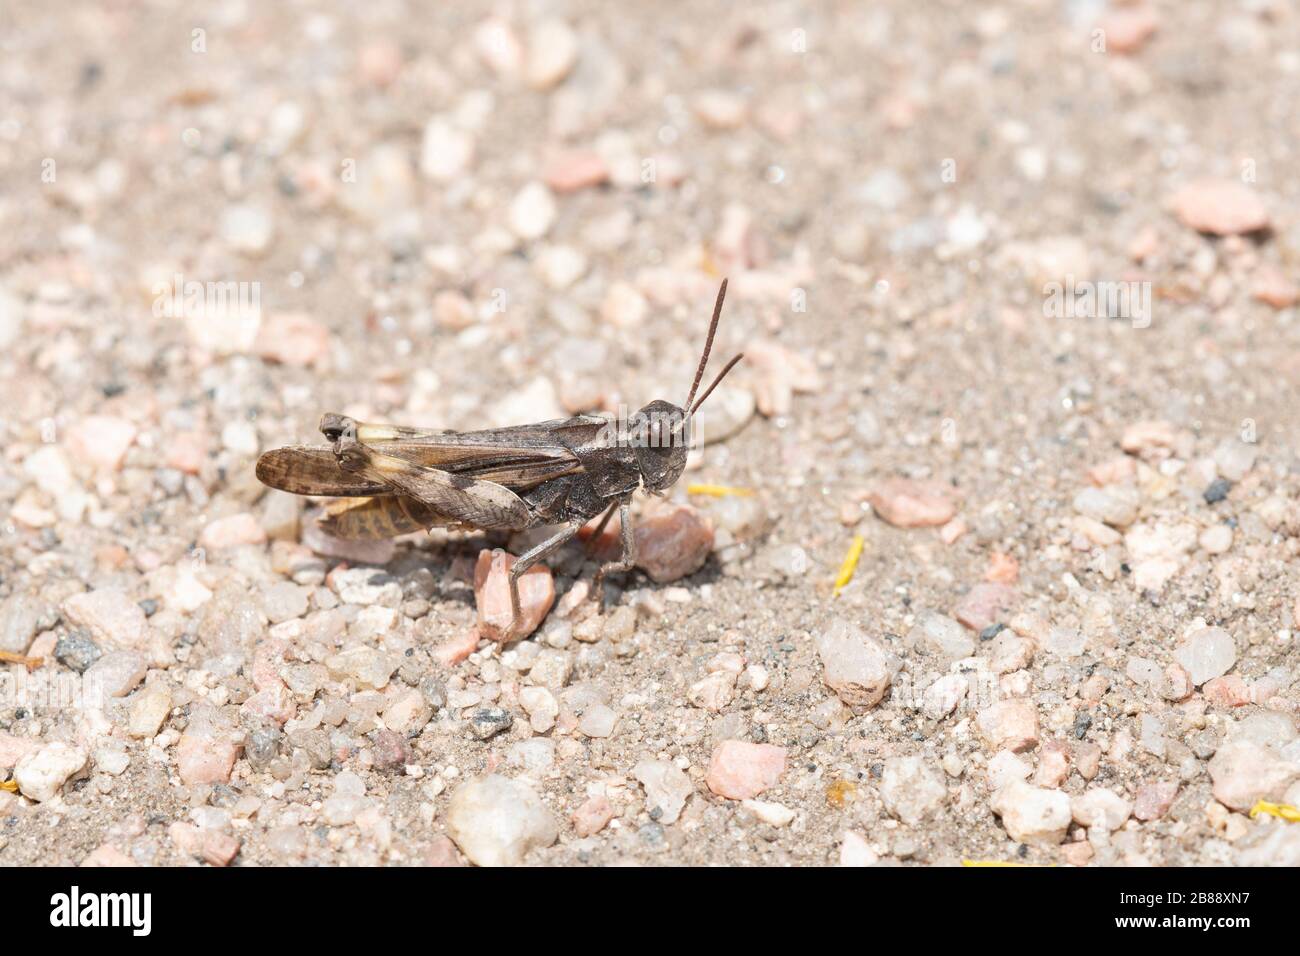 Speckle-winged Rangeland Grasshopper (Arphia conspersa) on the Ground on Dirt and Gravel in Colorado Stock Photo